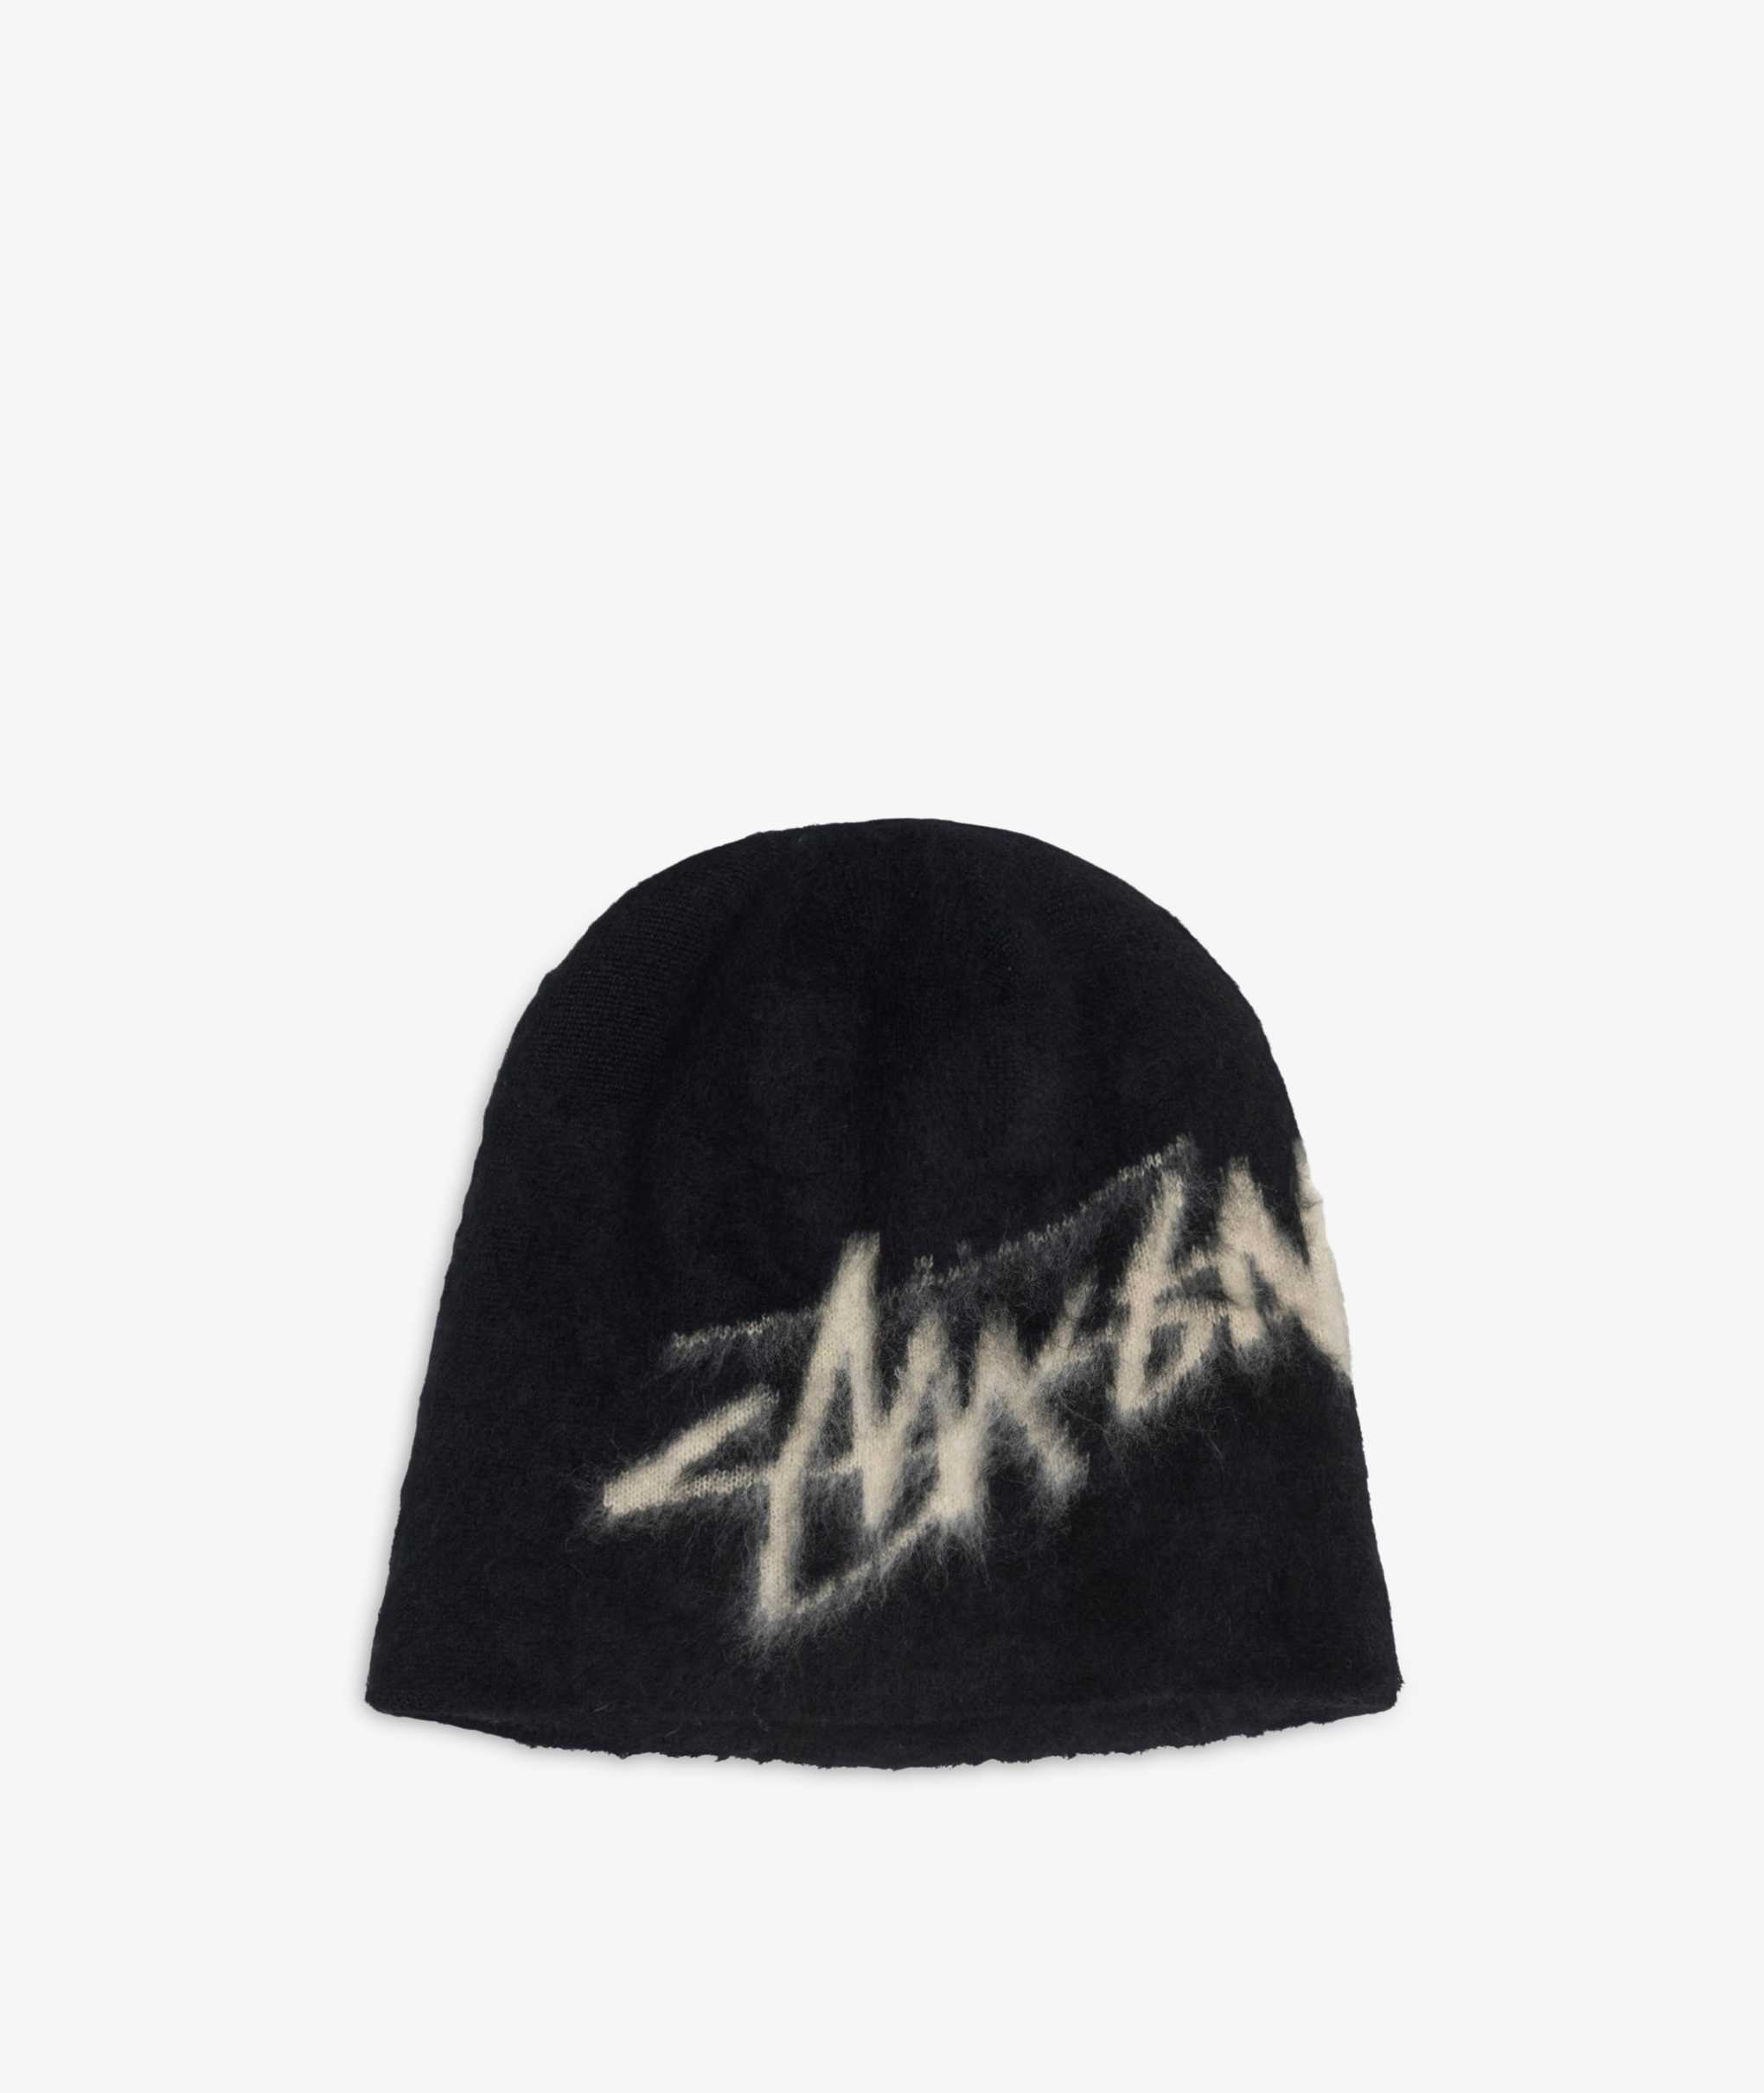 Norse Store | Shipping Worldwide - Stüssy Brushed Out Stock